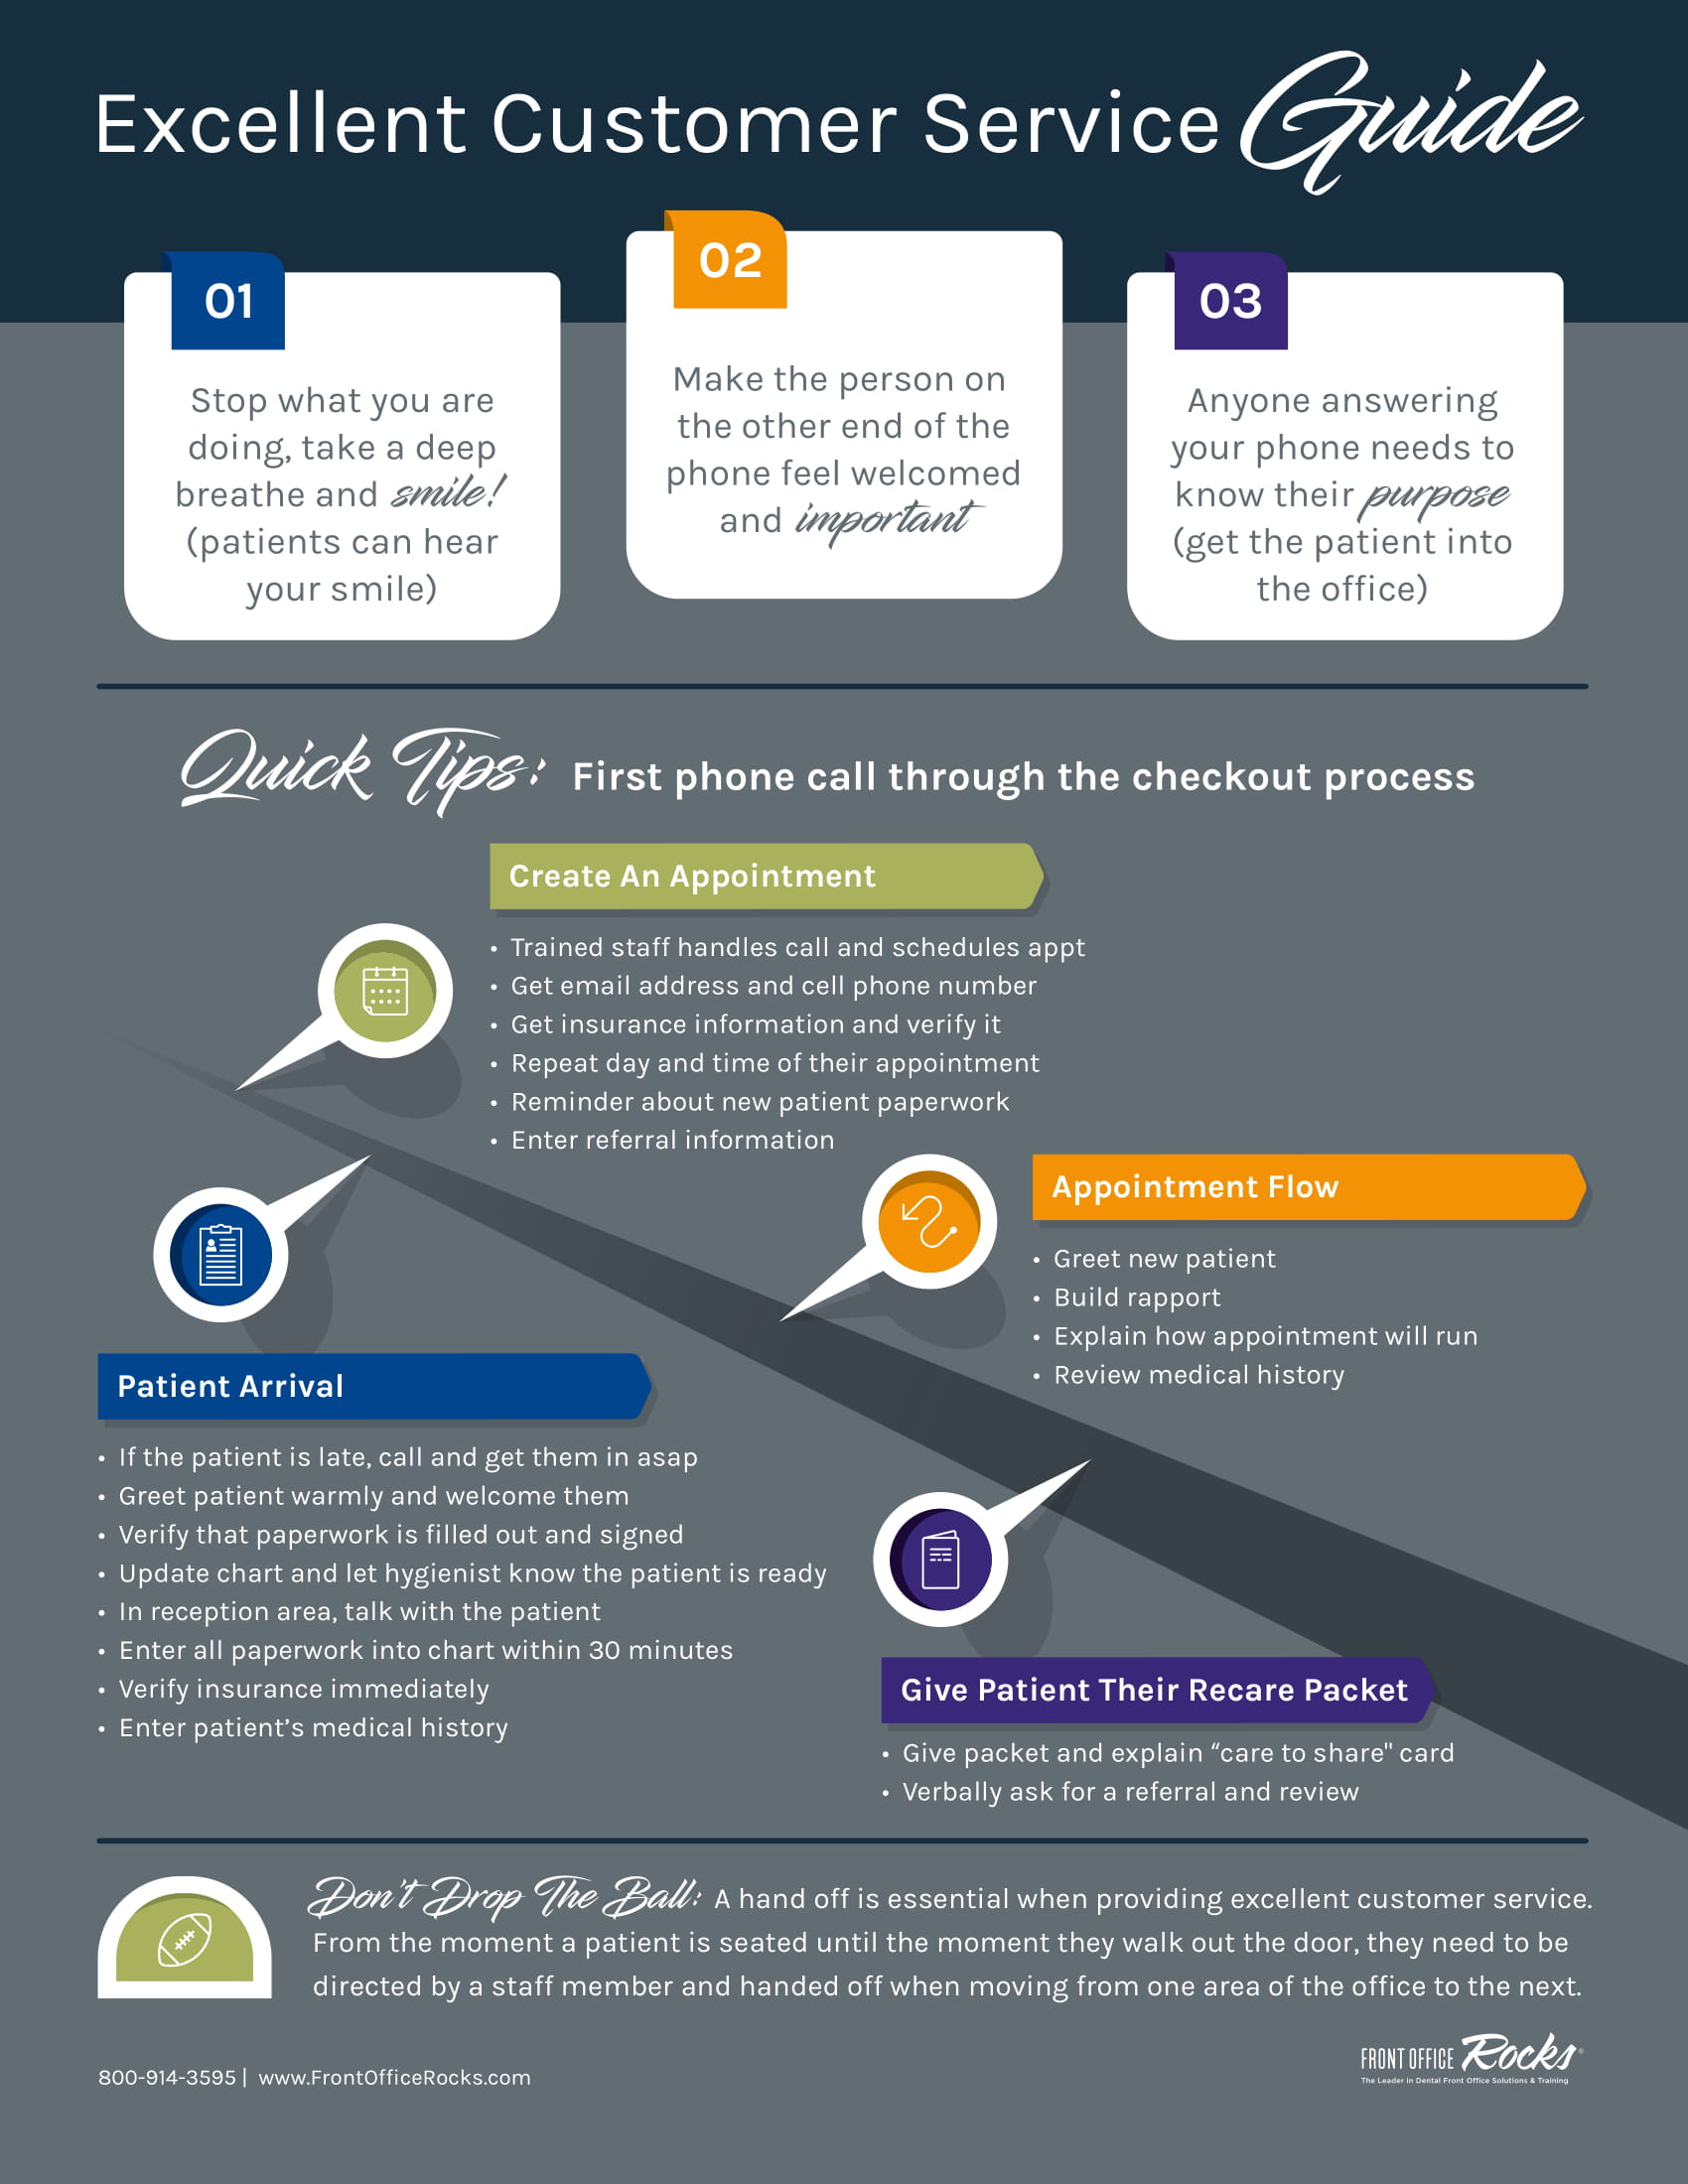 Excellent Customer Service Guide Infographic Image